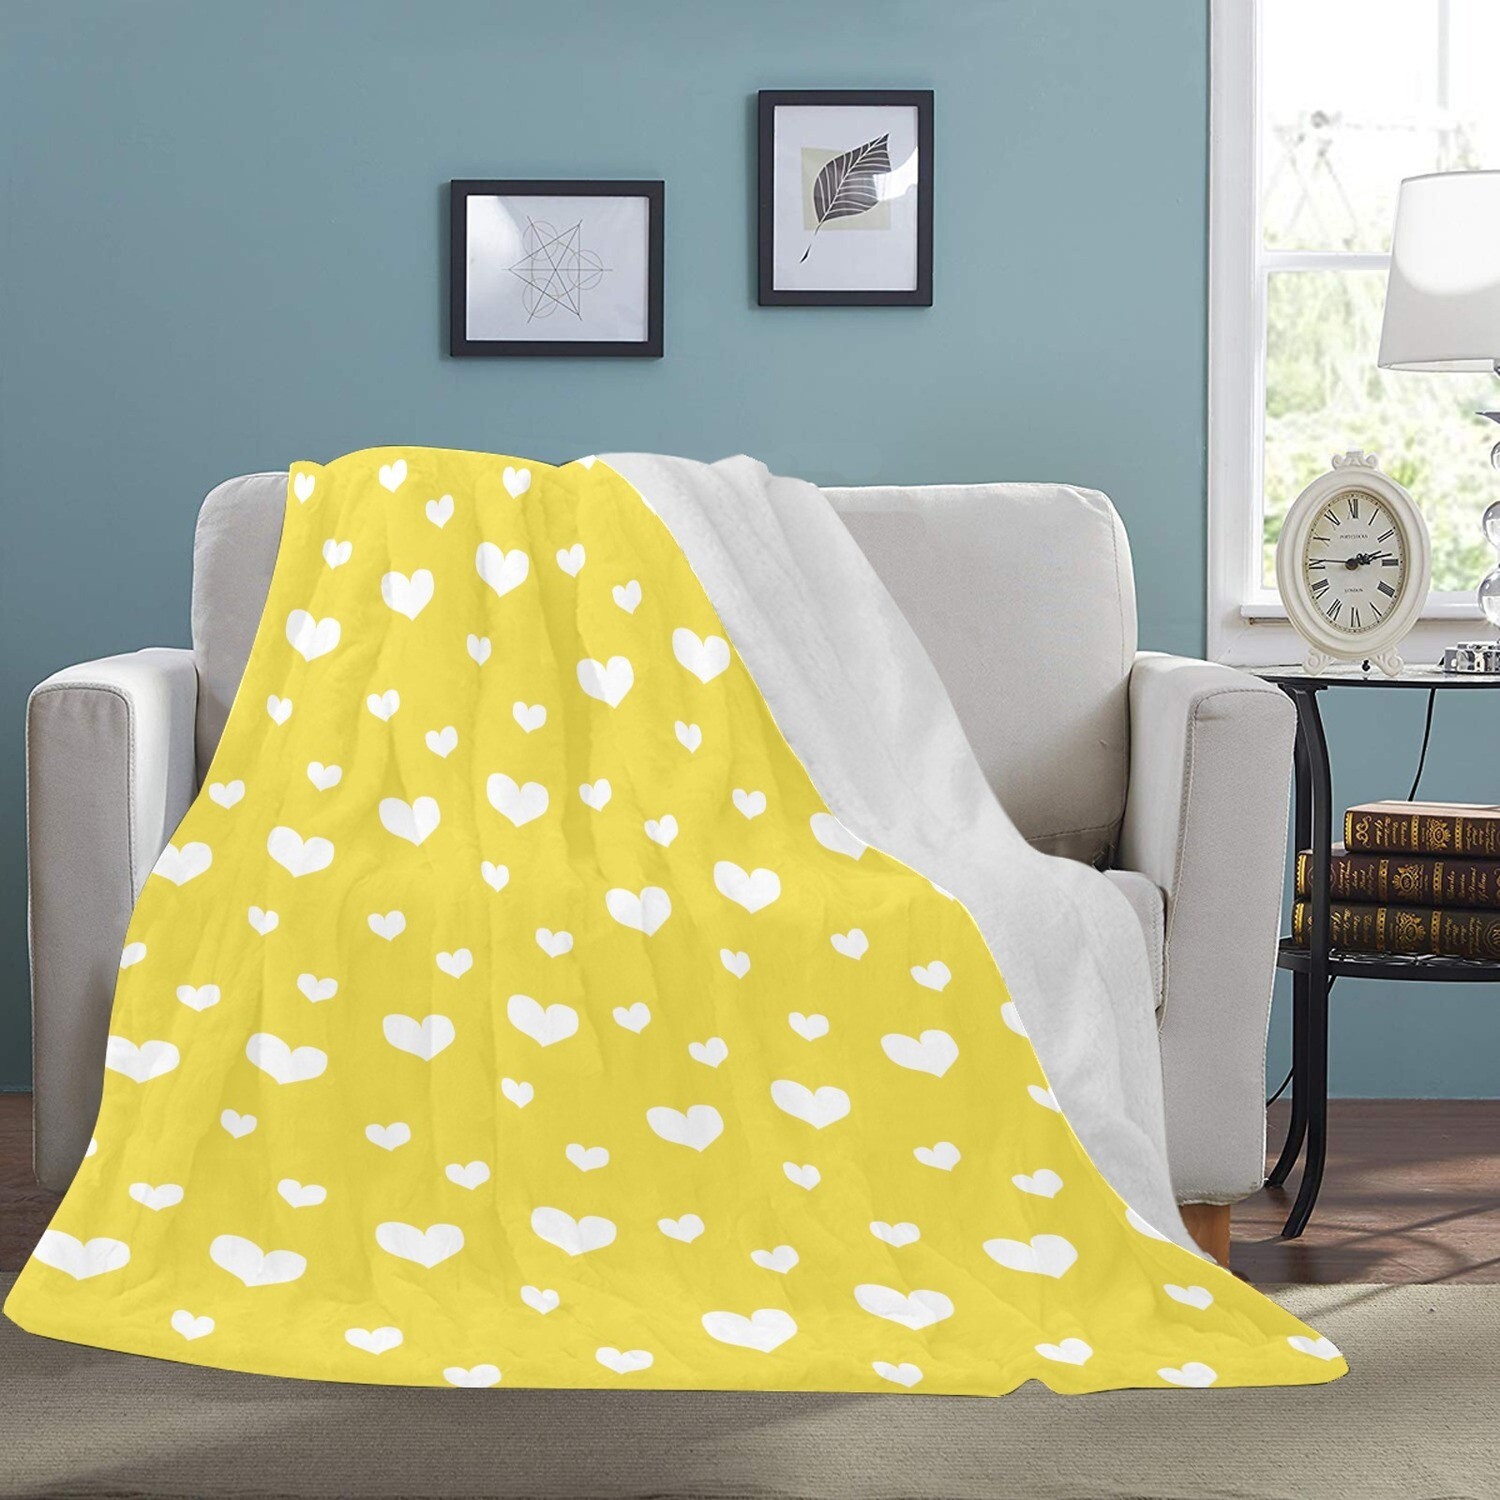 🤴🏽👸🏽💕Large Ultra-Soft Micro Fleece Blanket Valentine white hearts on yellow illuminating, gift, gift for her, gift for him, gift for them, 70"x80"